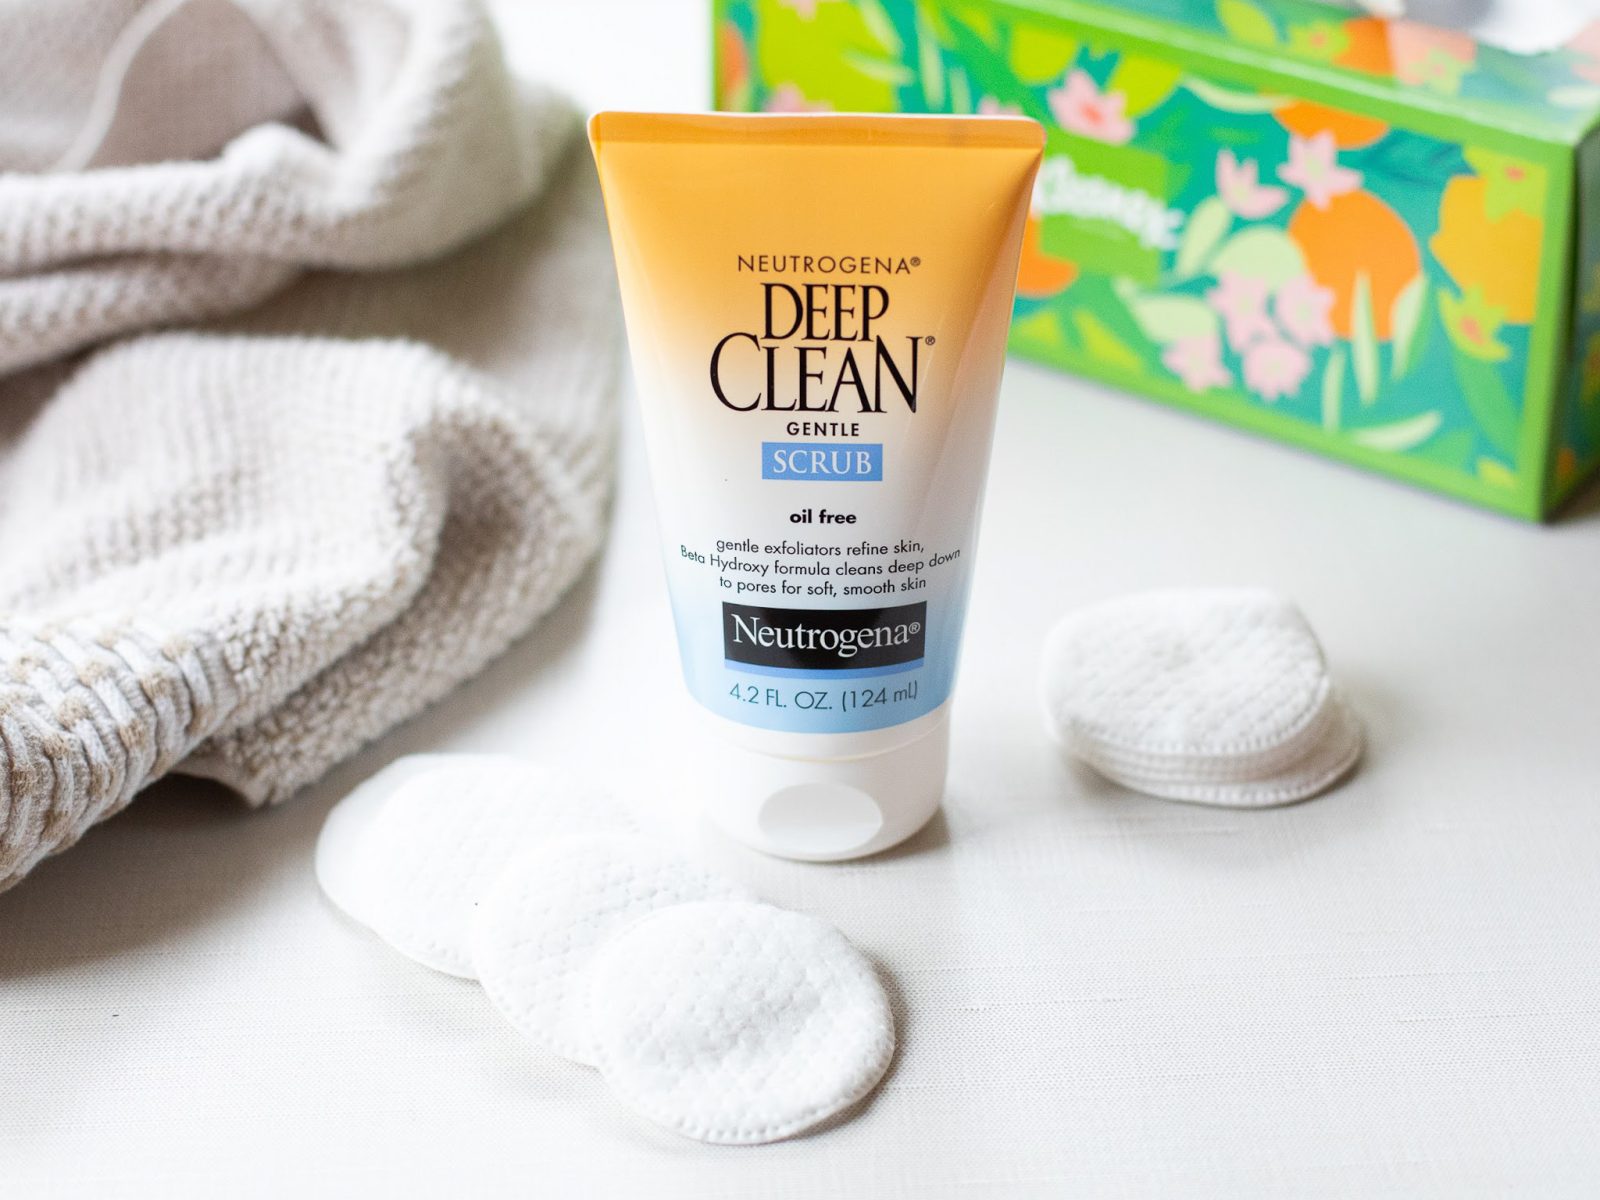 Neutrogena Deep Clean Products As Low As $2.49 At Kroger